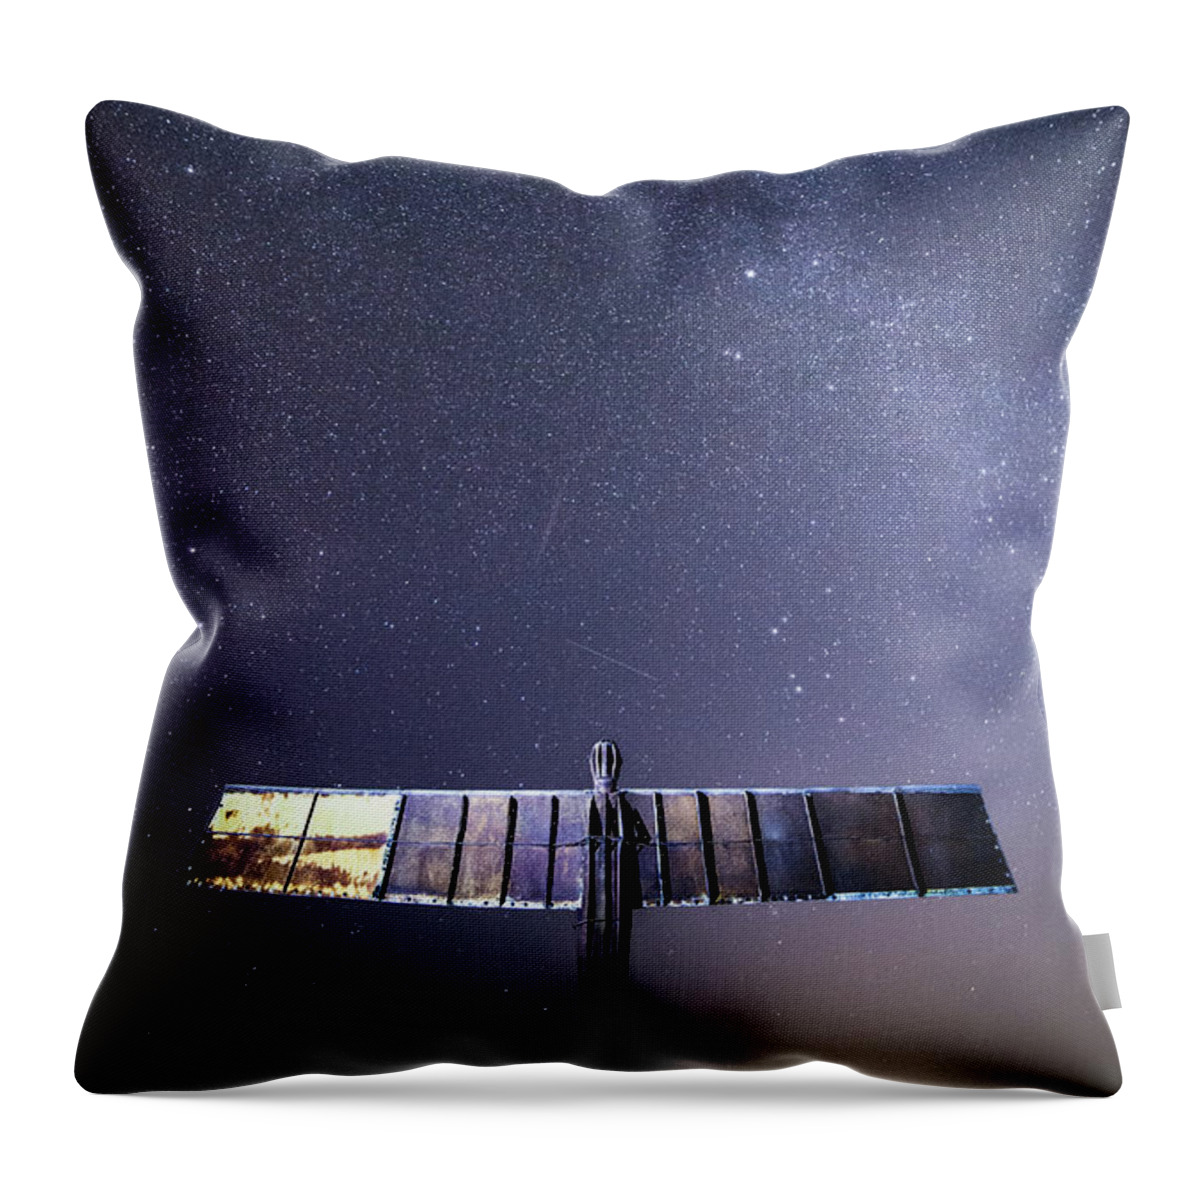 Angel Throw Pillow featuring the photograph The Angel and The Milky Way by Anita Nicholson